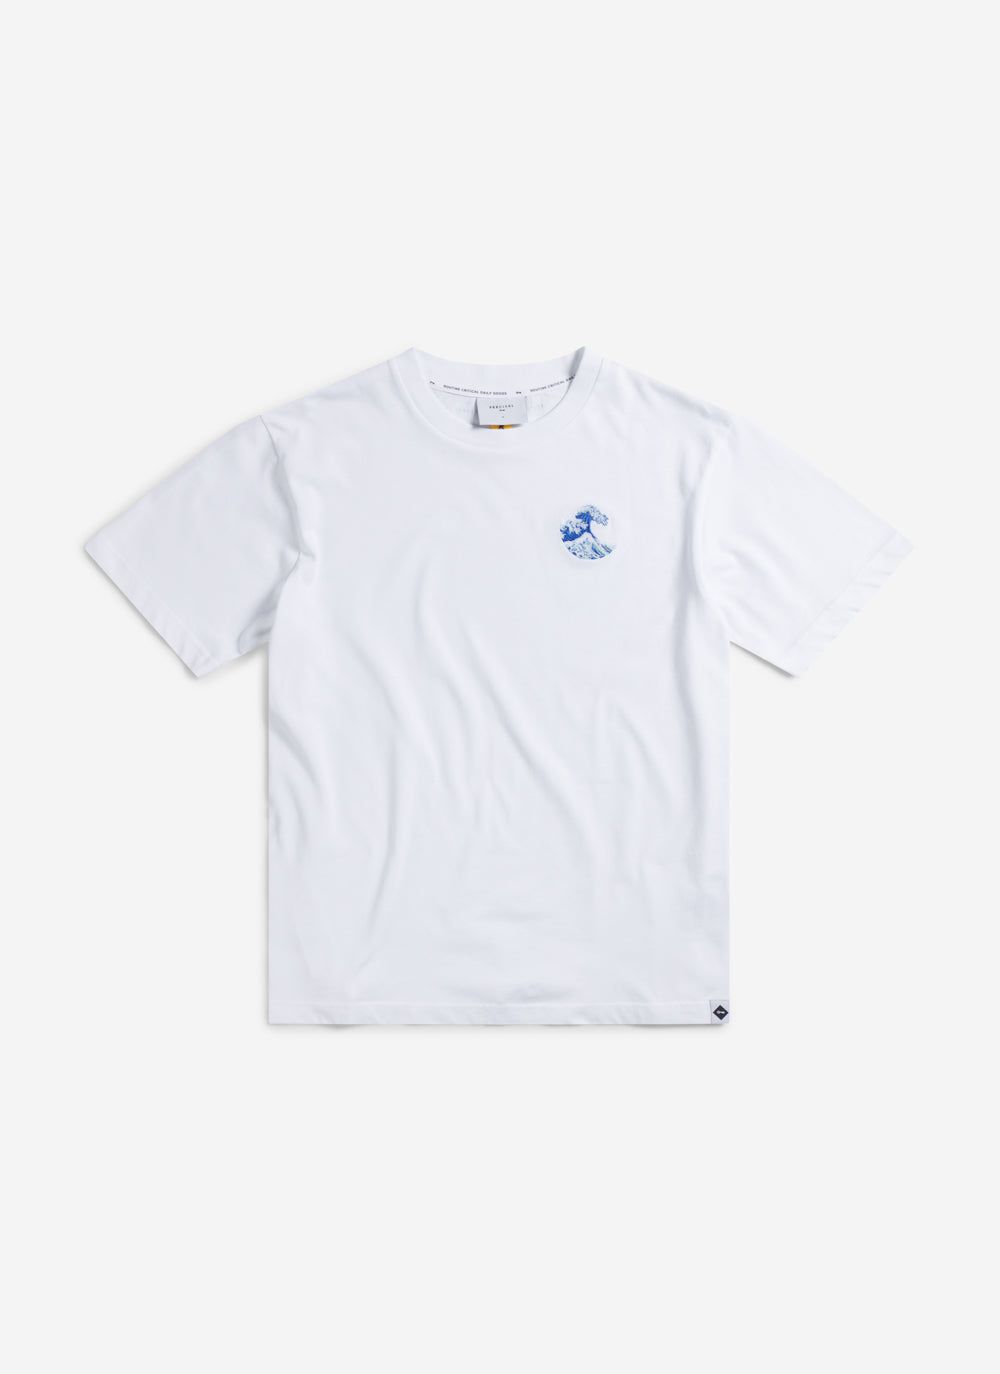 Men's Embroidered T Shirt | Heavyweight | Wave | White & Percival Menswear